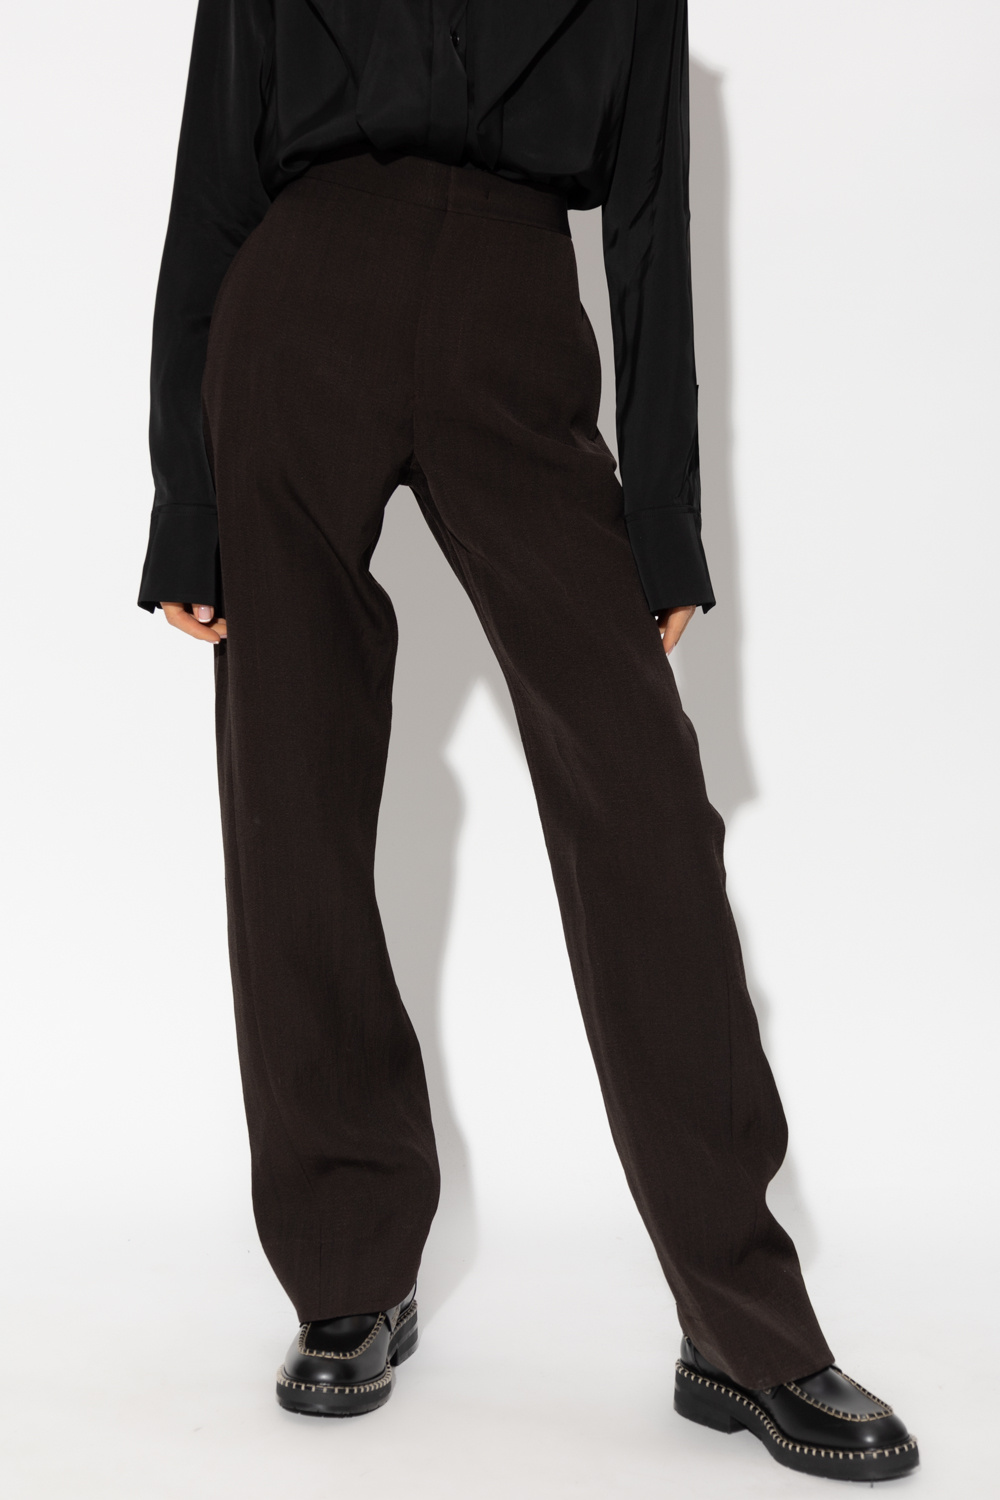 JIL SANDER Chiffon trousers with tapered legs